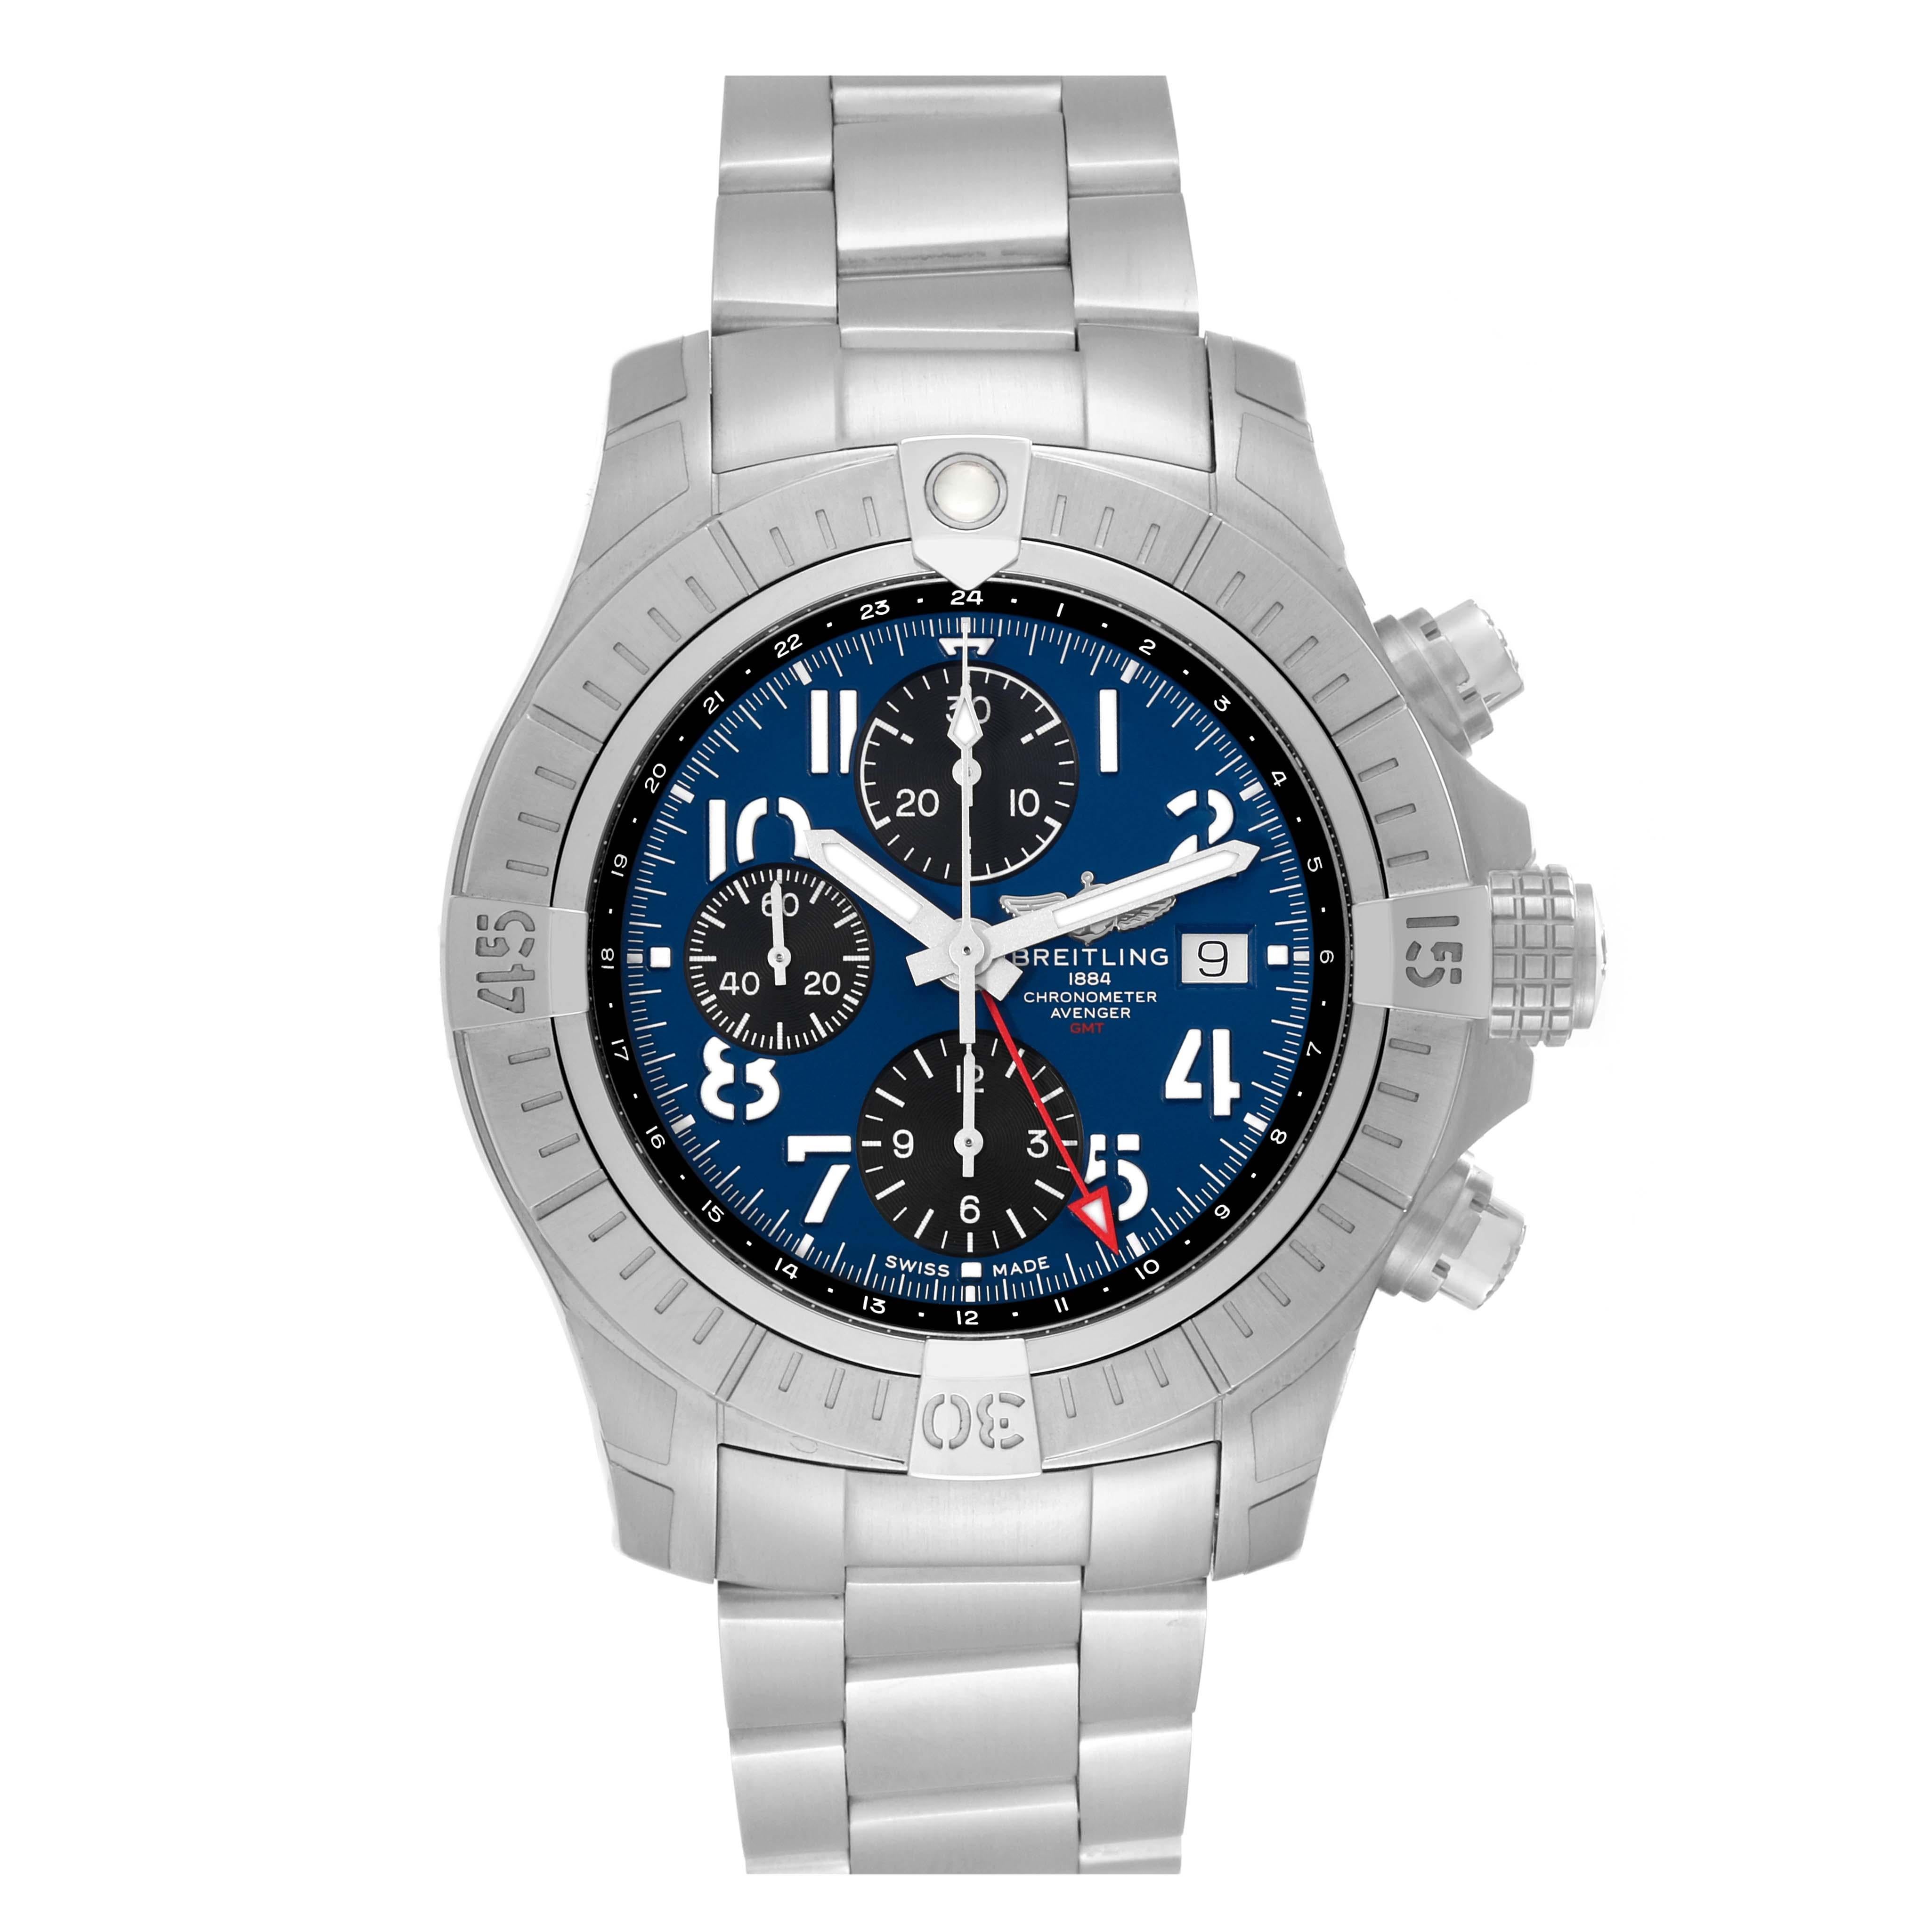 Breitling Avenger Chronograph GMT 45 Steel Mens Watch A24315 Box Card. Automatic self-winding movement. Chronograph function. Stainless steel case 45 mm in diameter with screwed-down crown and pushers. Stainless steel unidirectional rotating bezel.